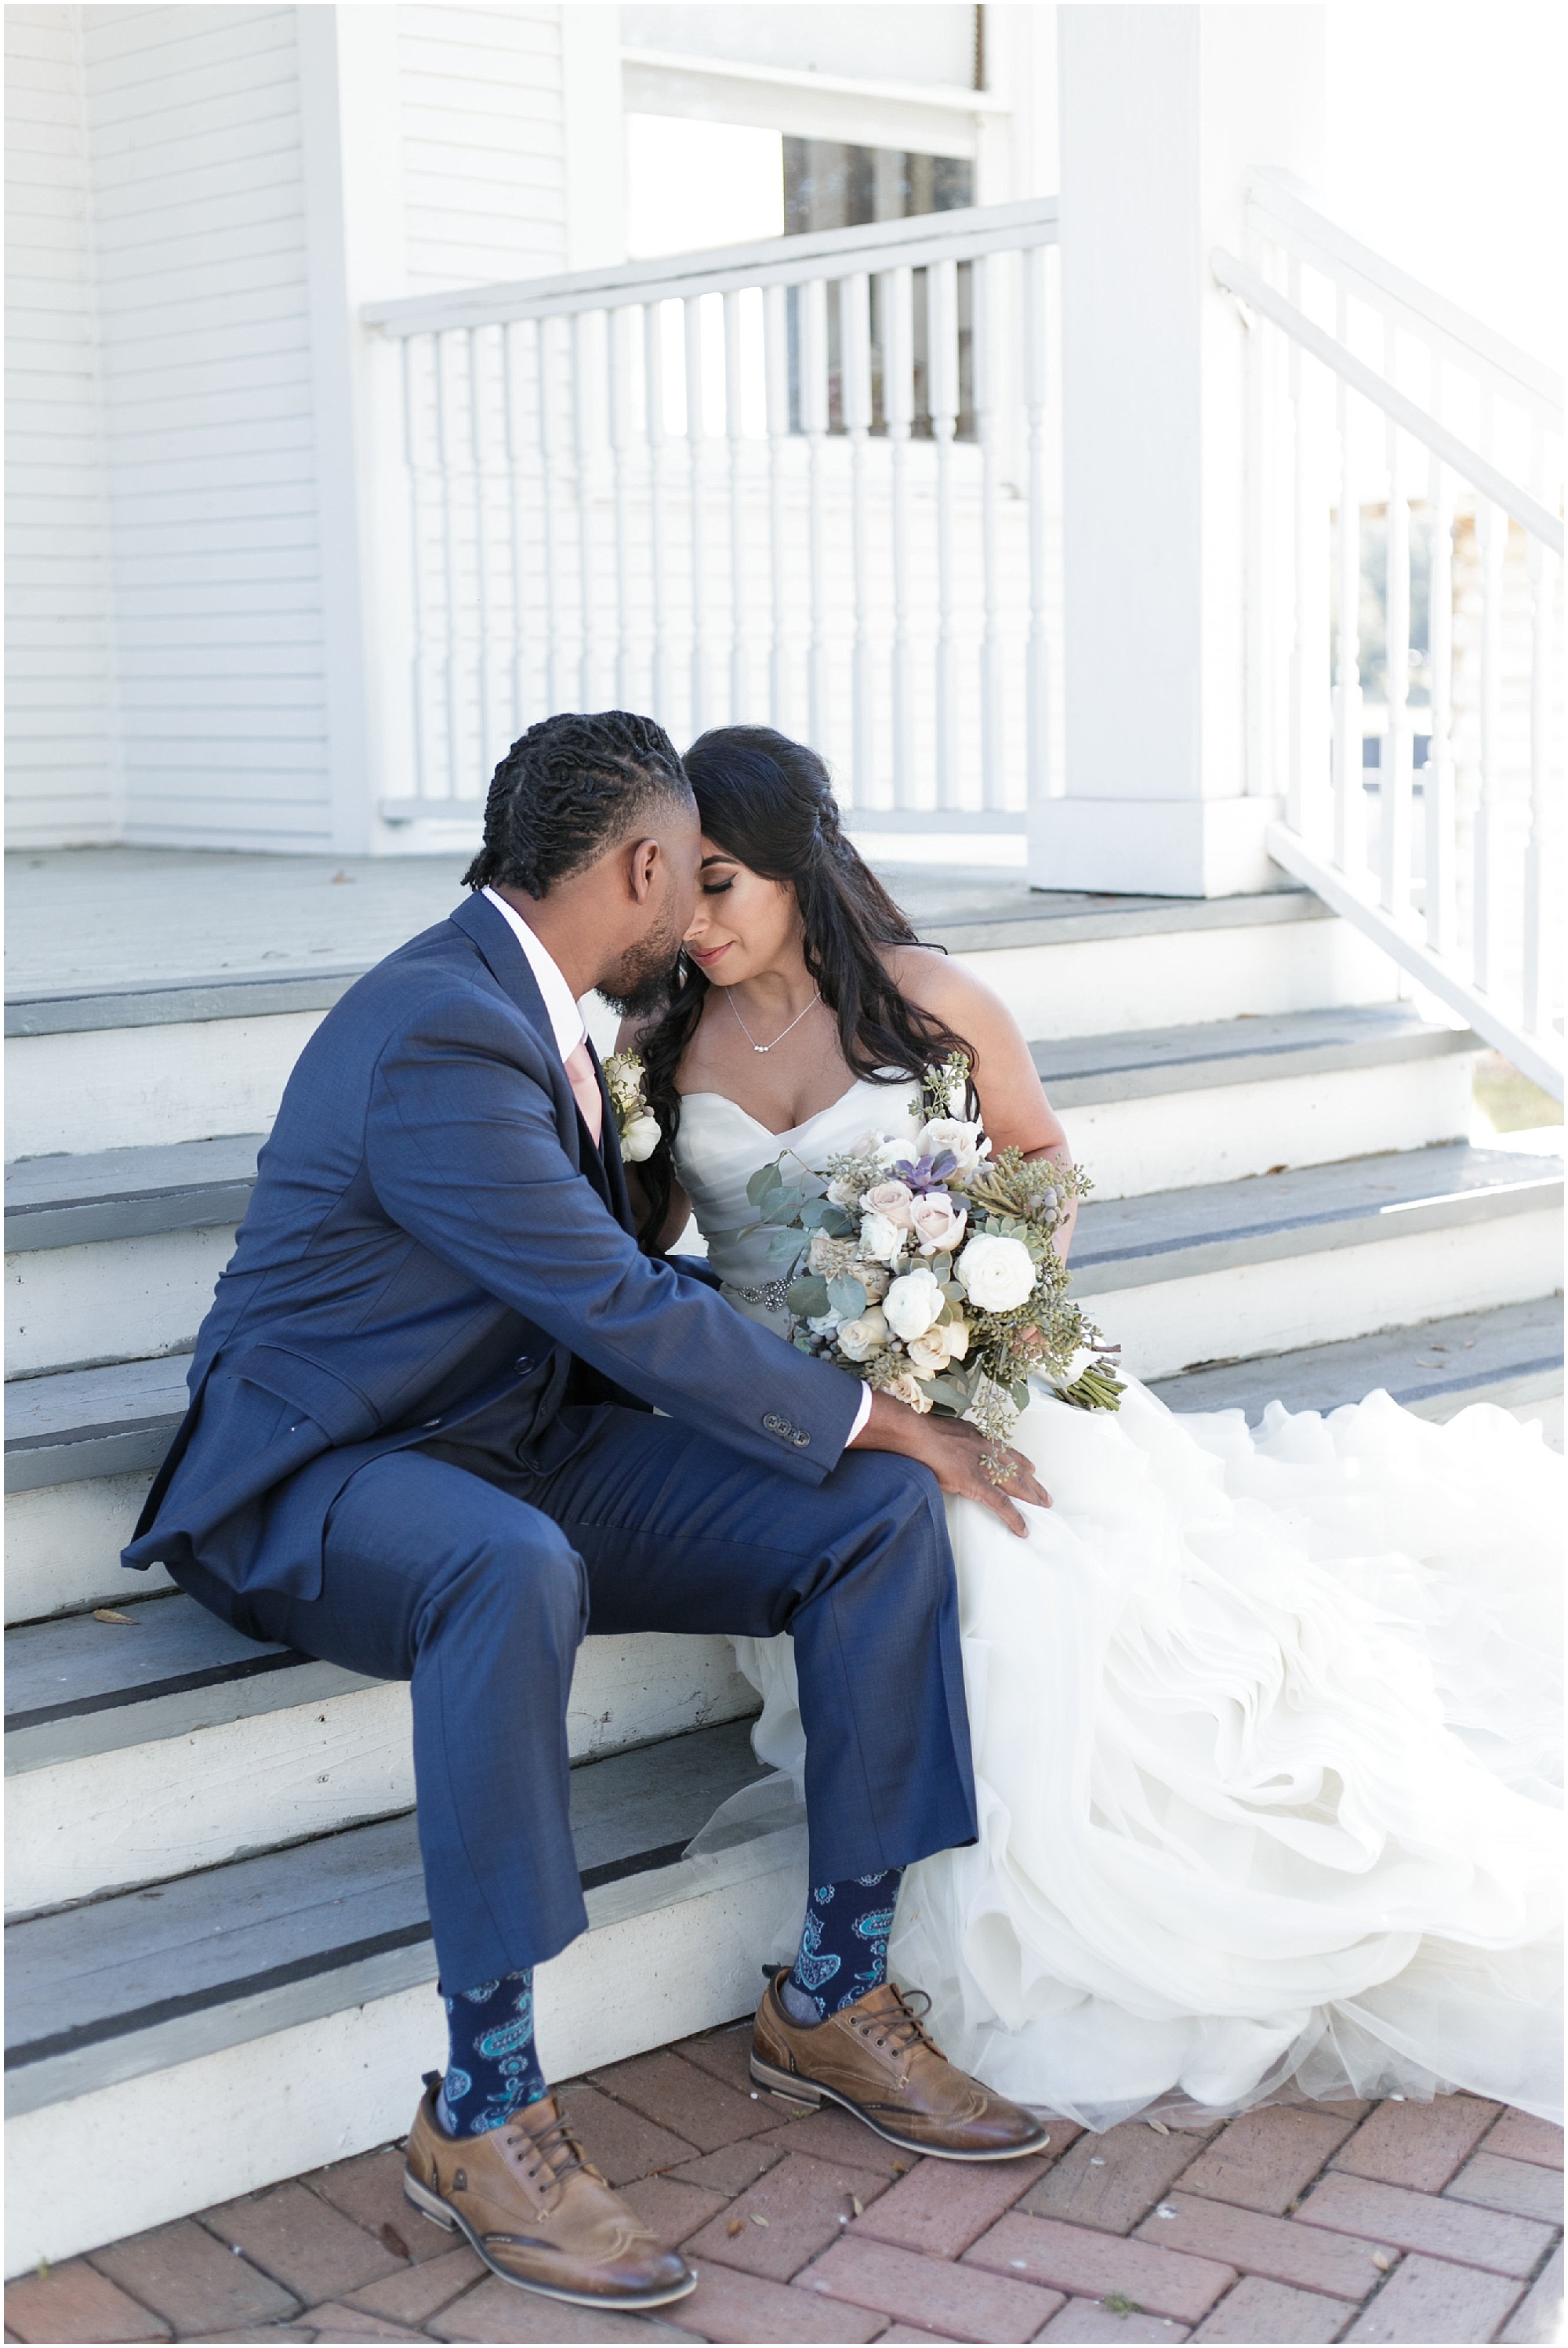 Bride and groom snuggling while sitting on steps of a library.